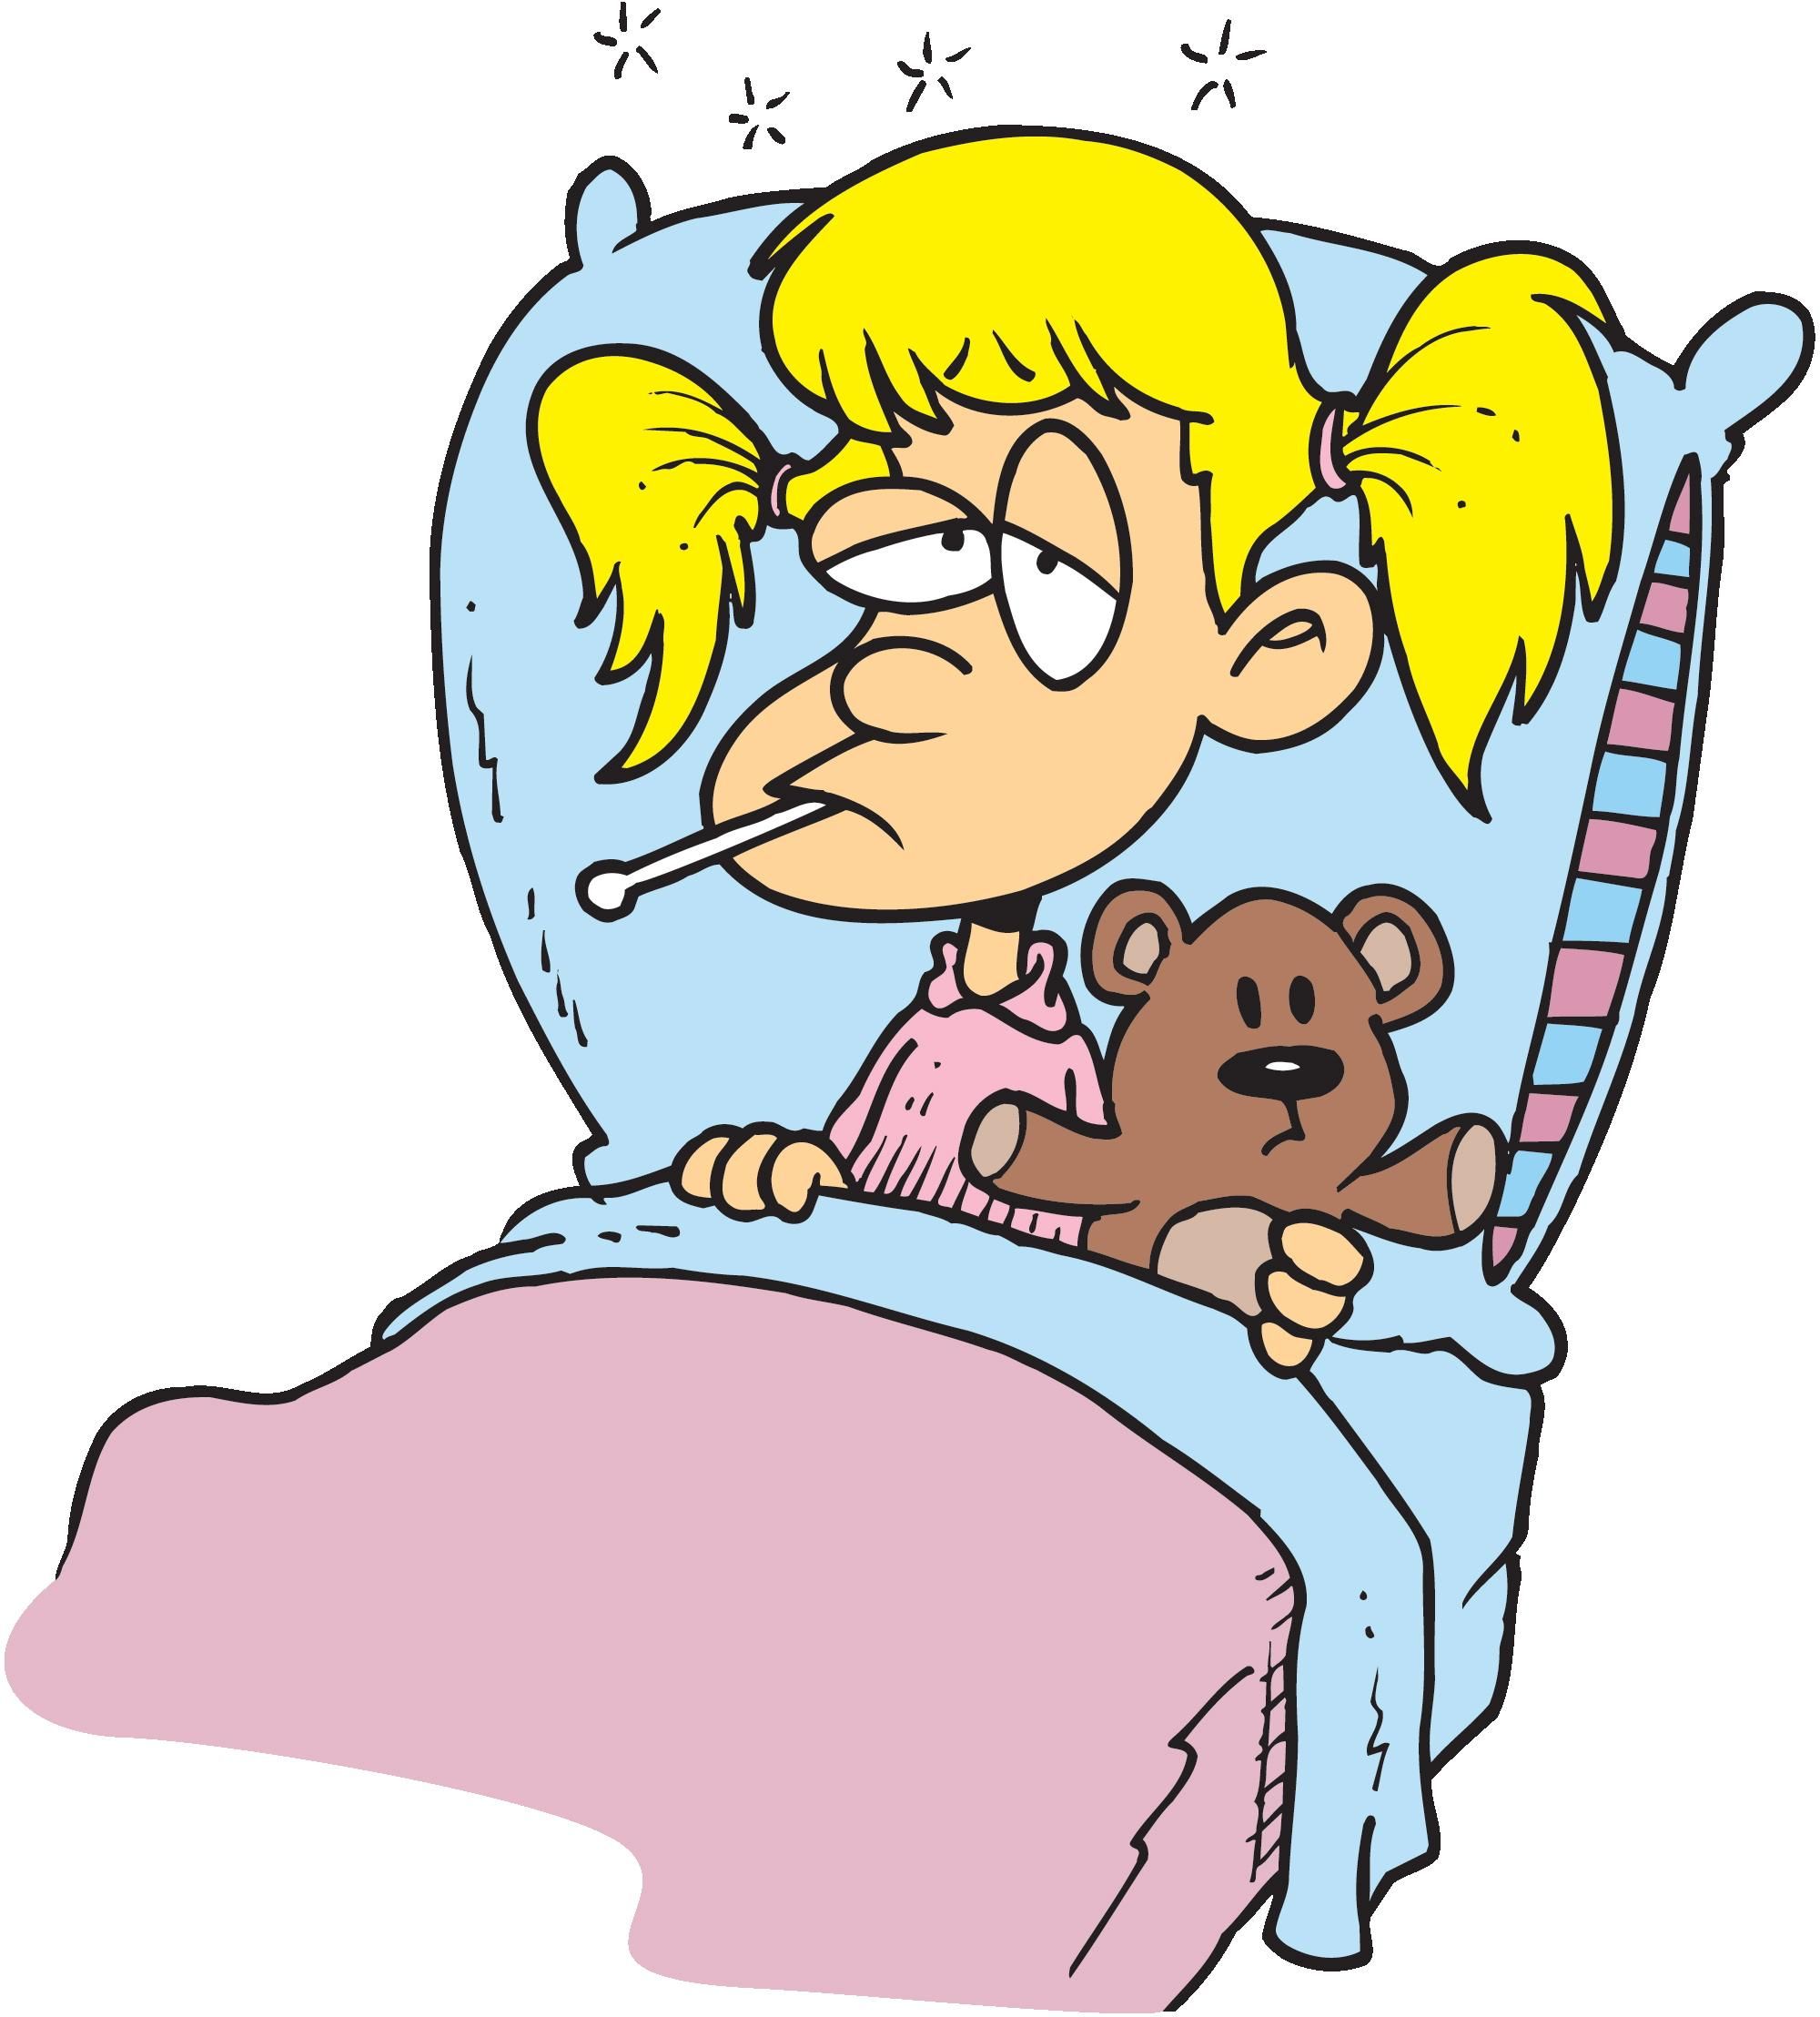 ill person Pix for feeling sick clipart fun sick and jpg